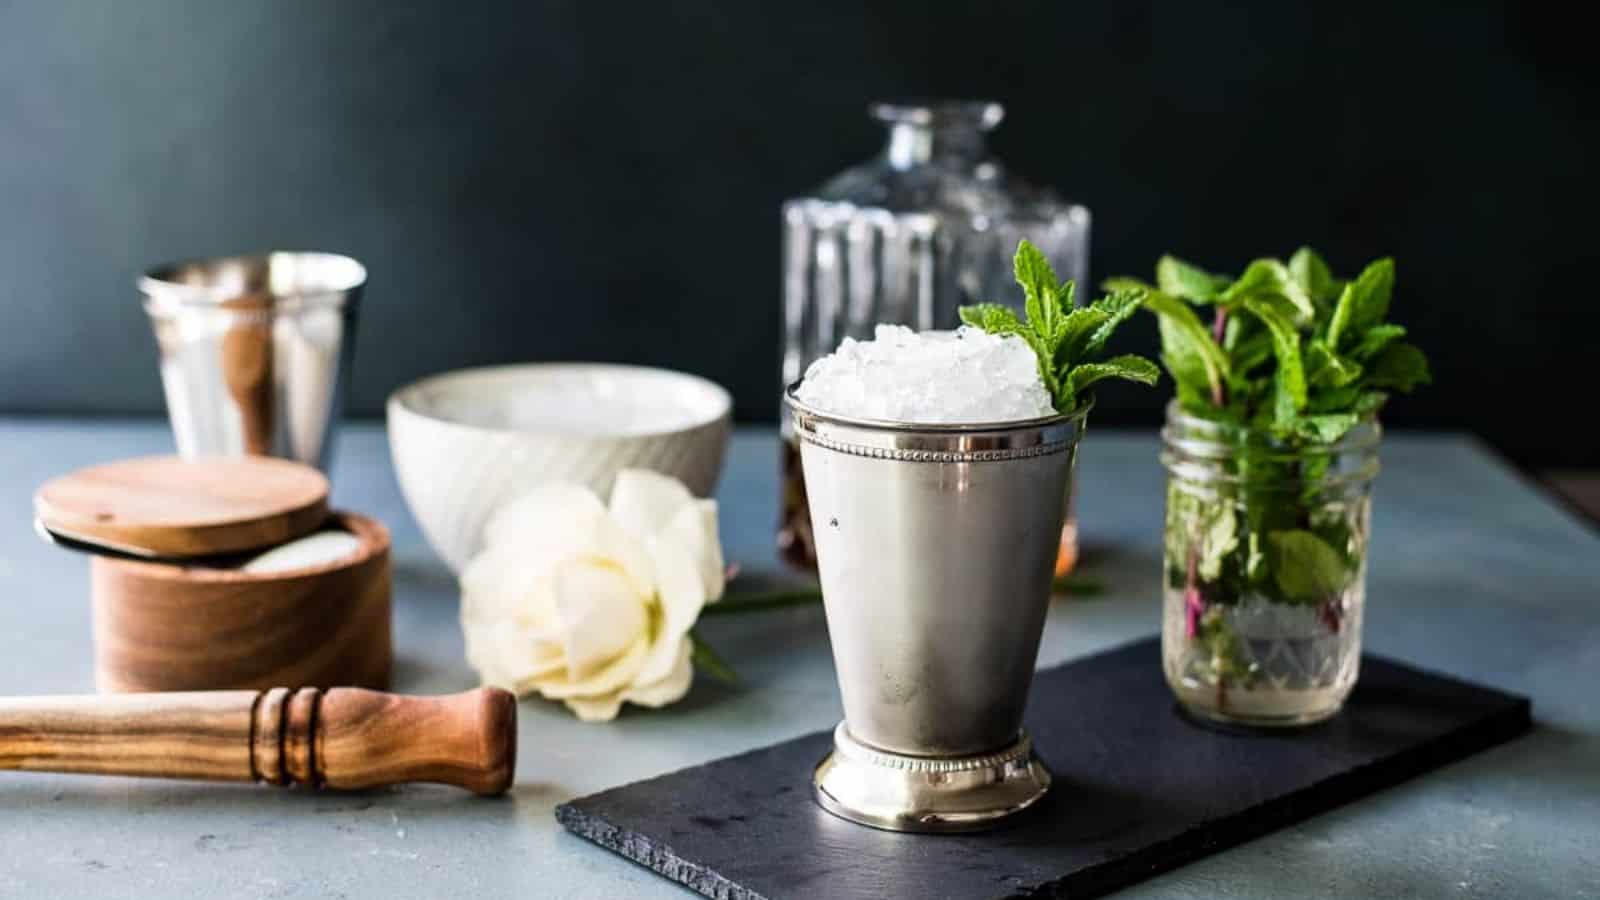 A mint julep in a silver mint julep cup with sprigs of mint and a decanter of bourbon and other ingredients in the background.